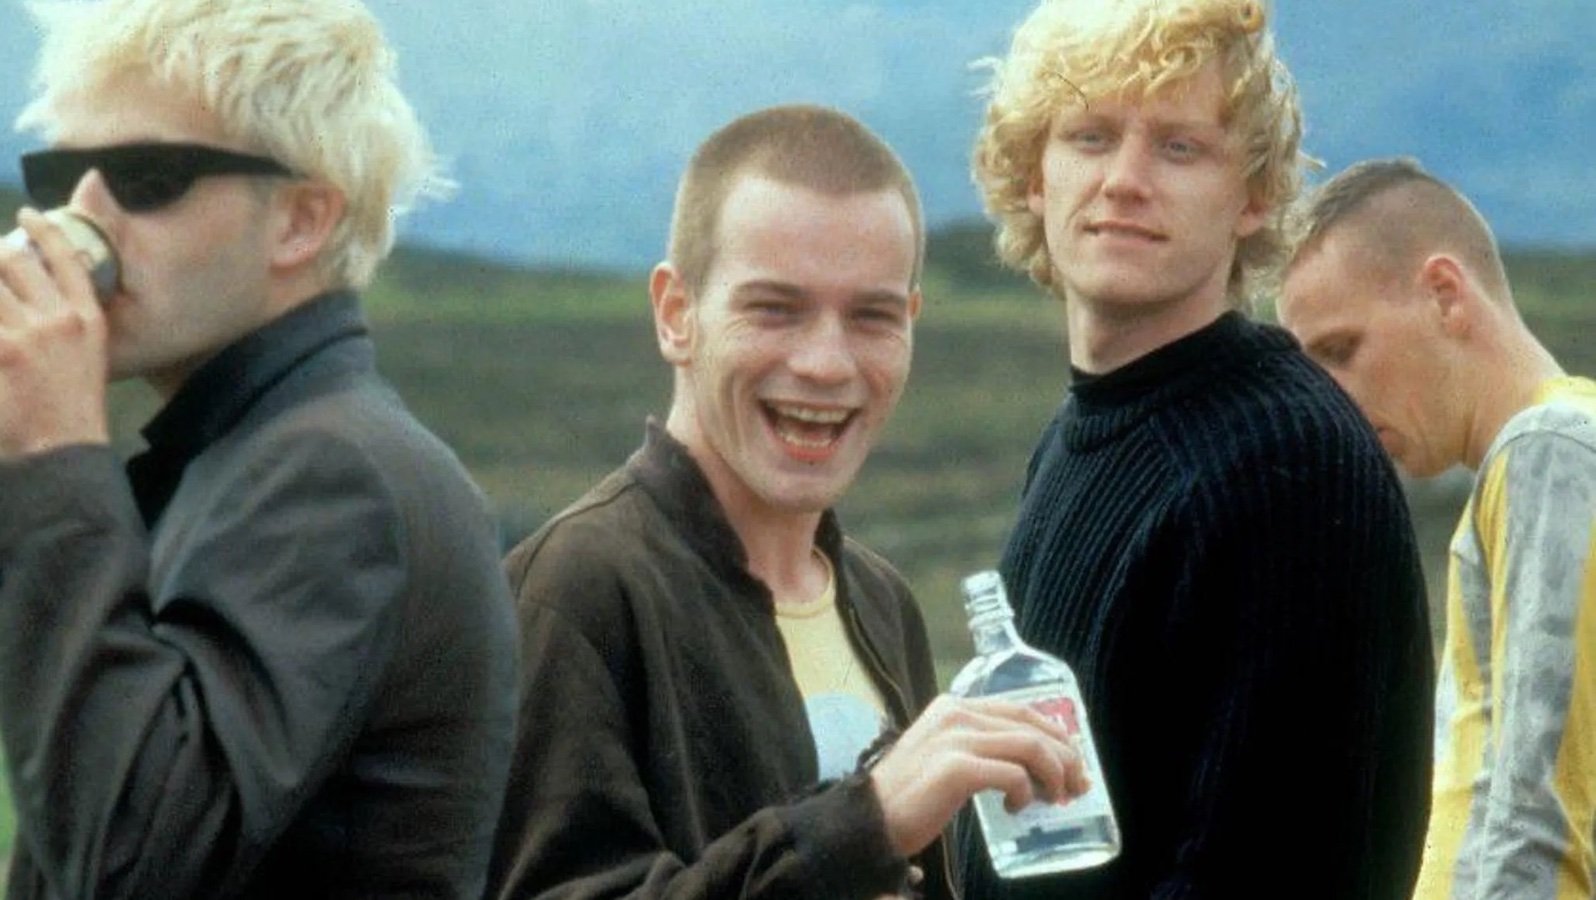 A group of four pale-skinned young men stand in a field, the second from the left is smiling as he holds an open bottle of liquor